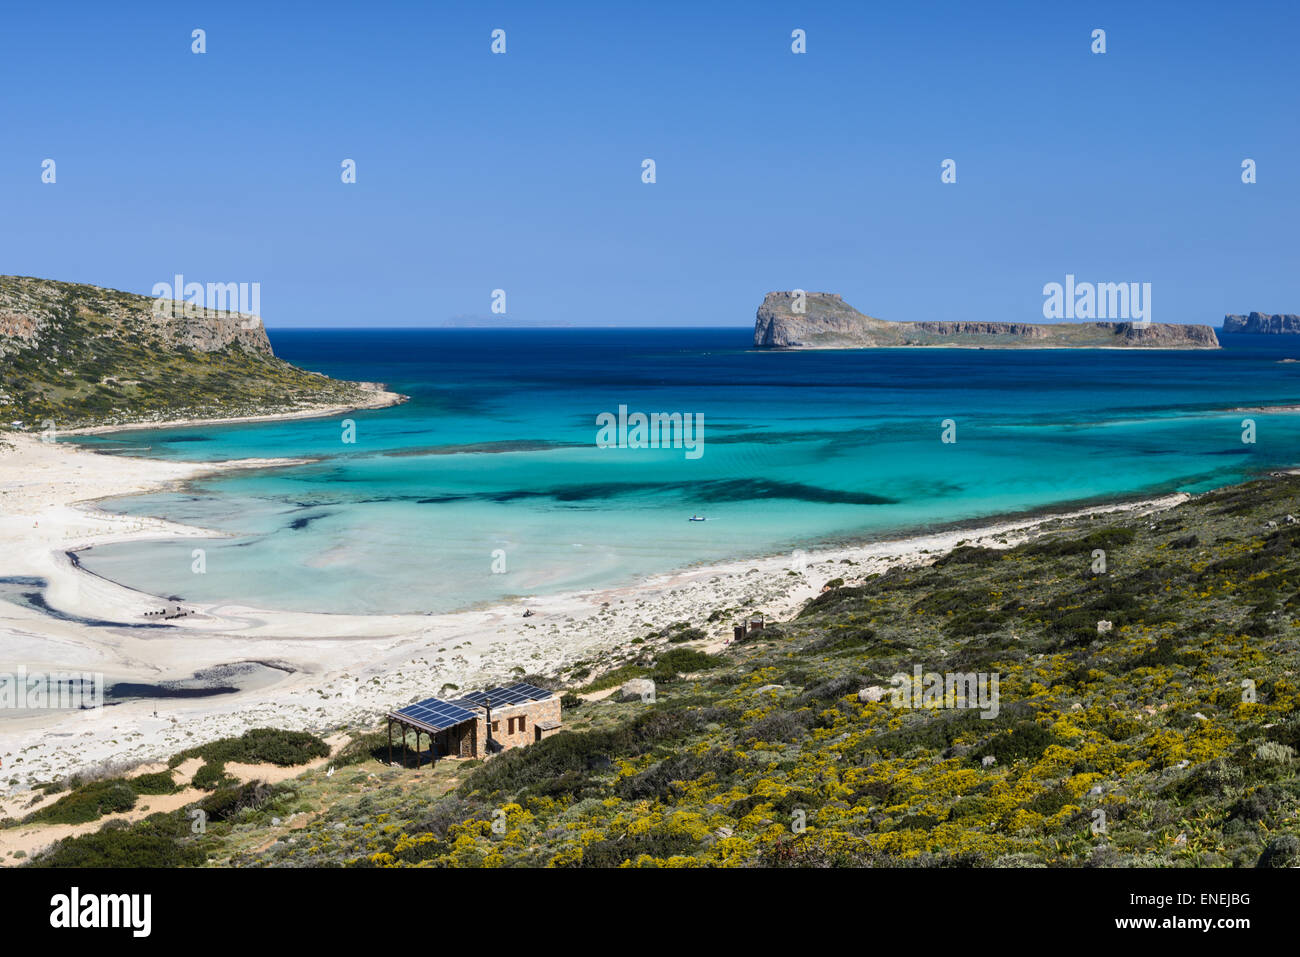 The tropical beach of Balos in the west end of Crete island, Greece Stock Photo